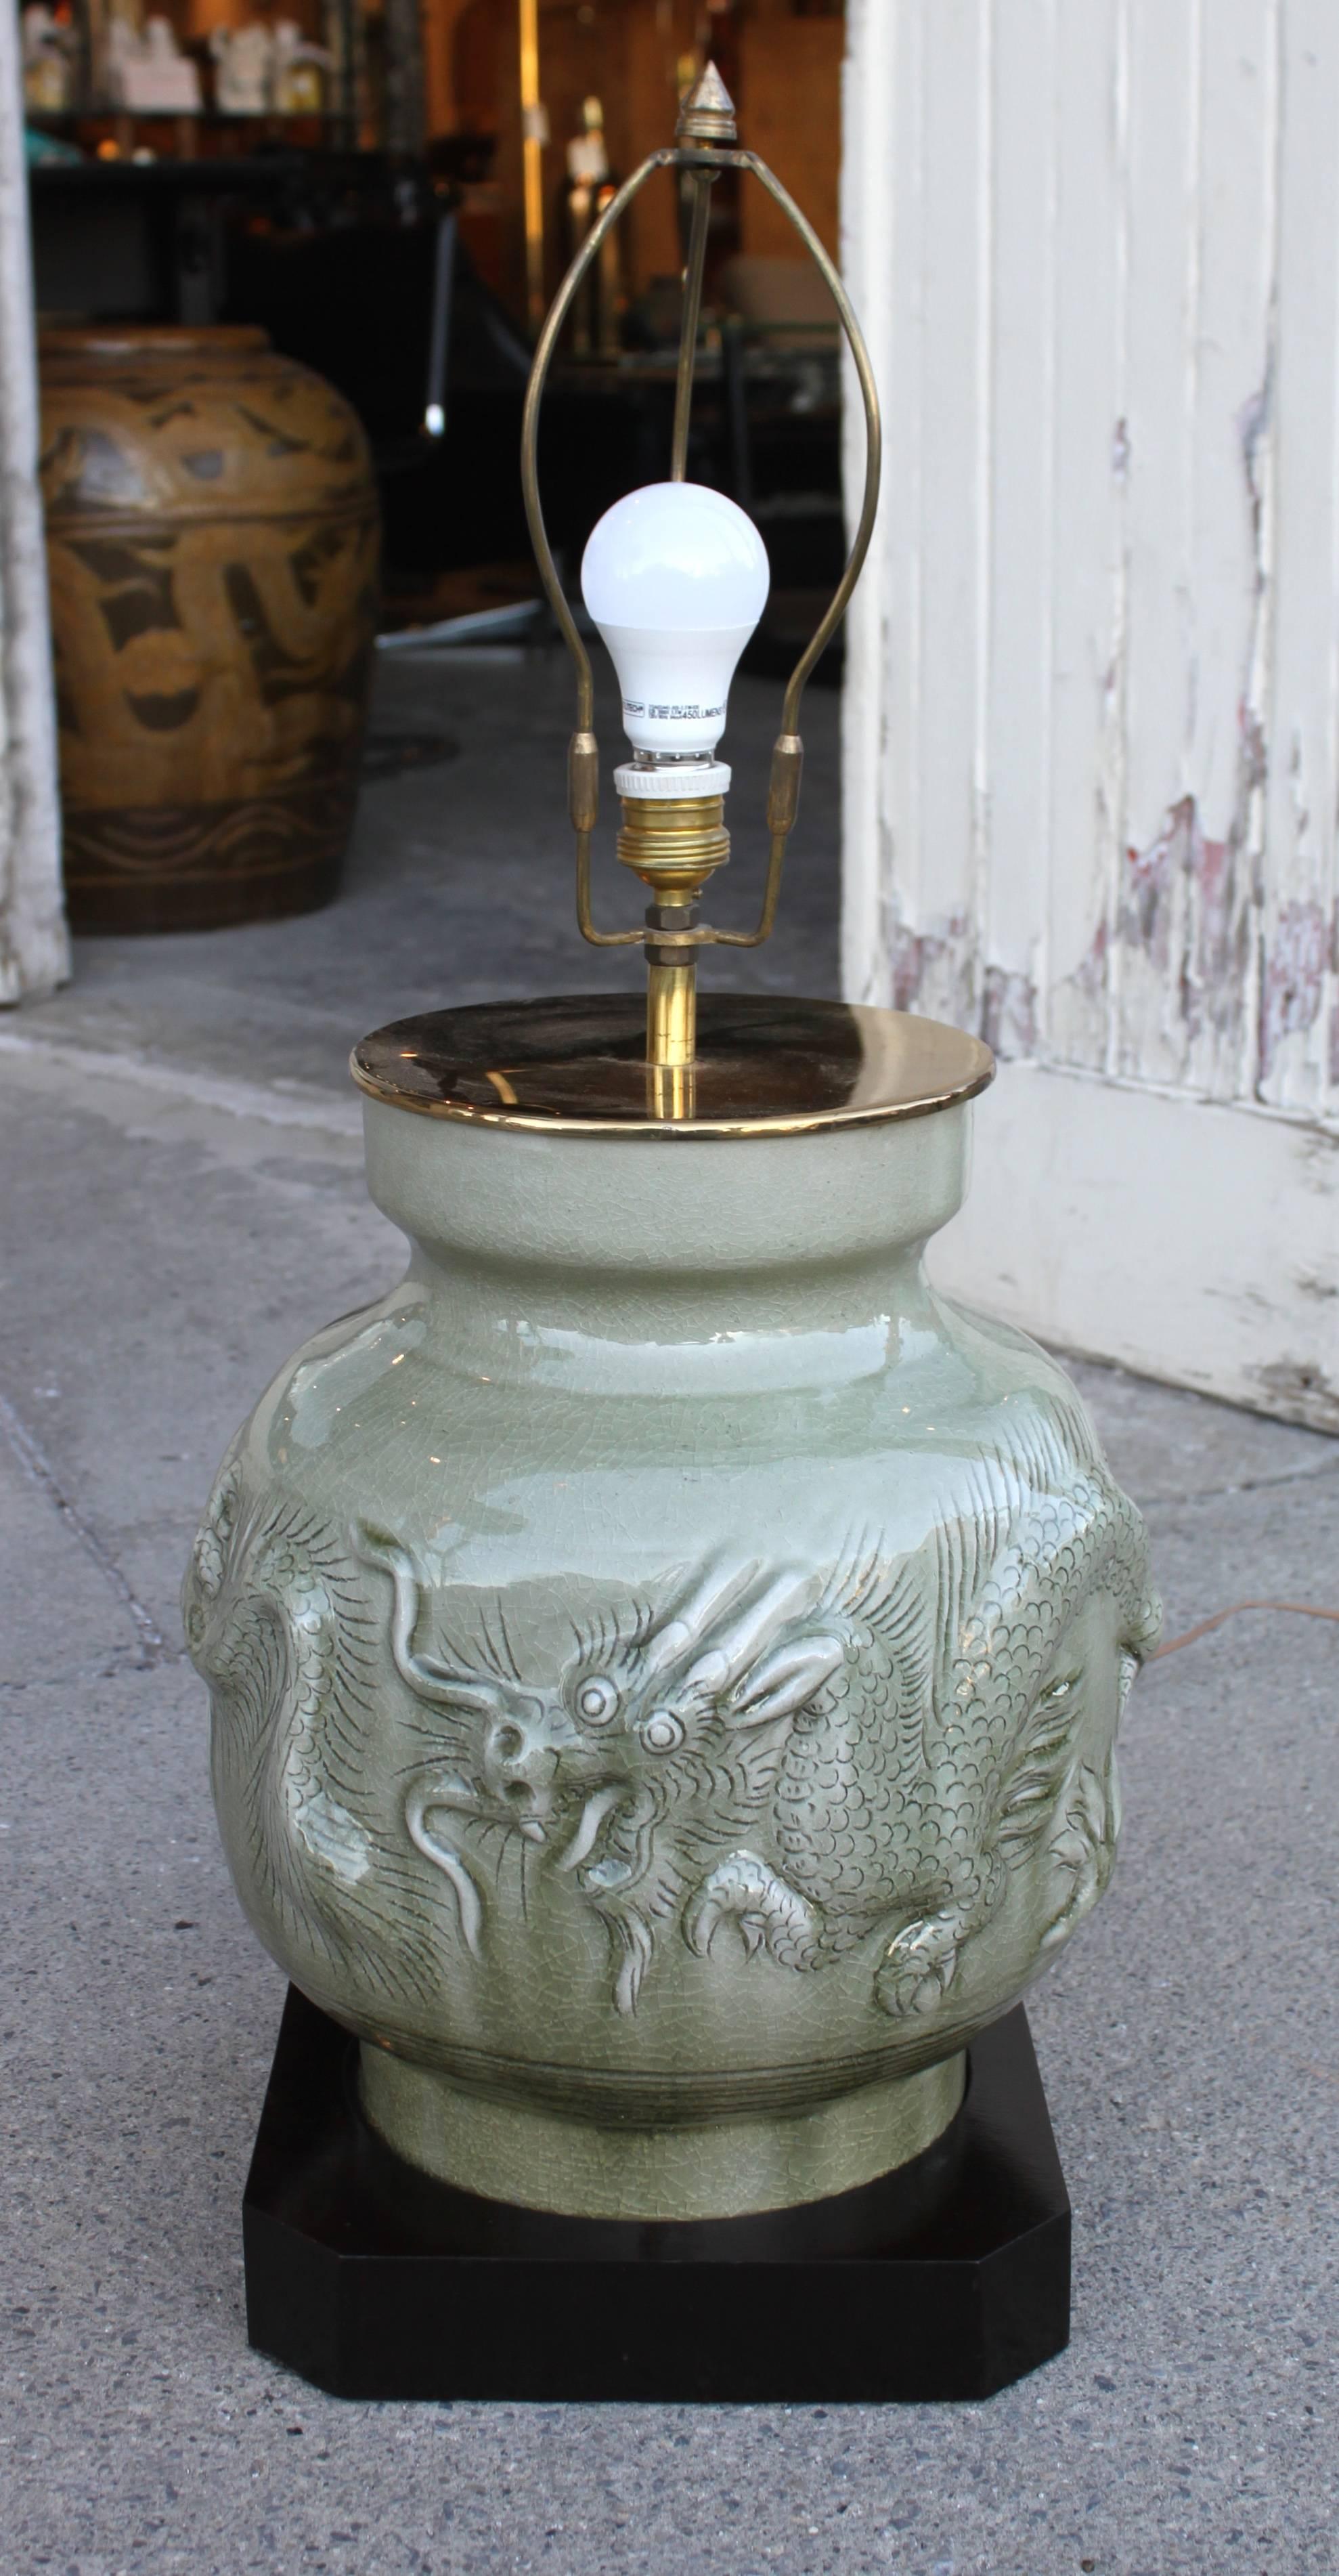 Vintage celadon dragon lamp with silk shade. High quality piece set with brass fittings.